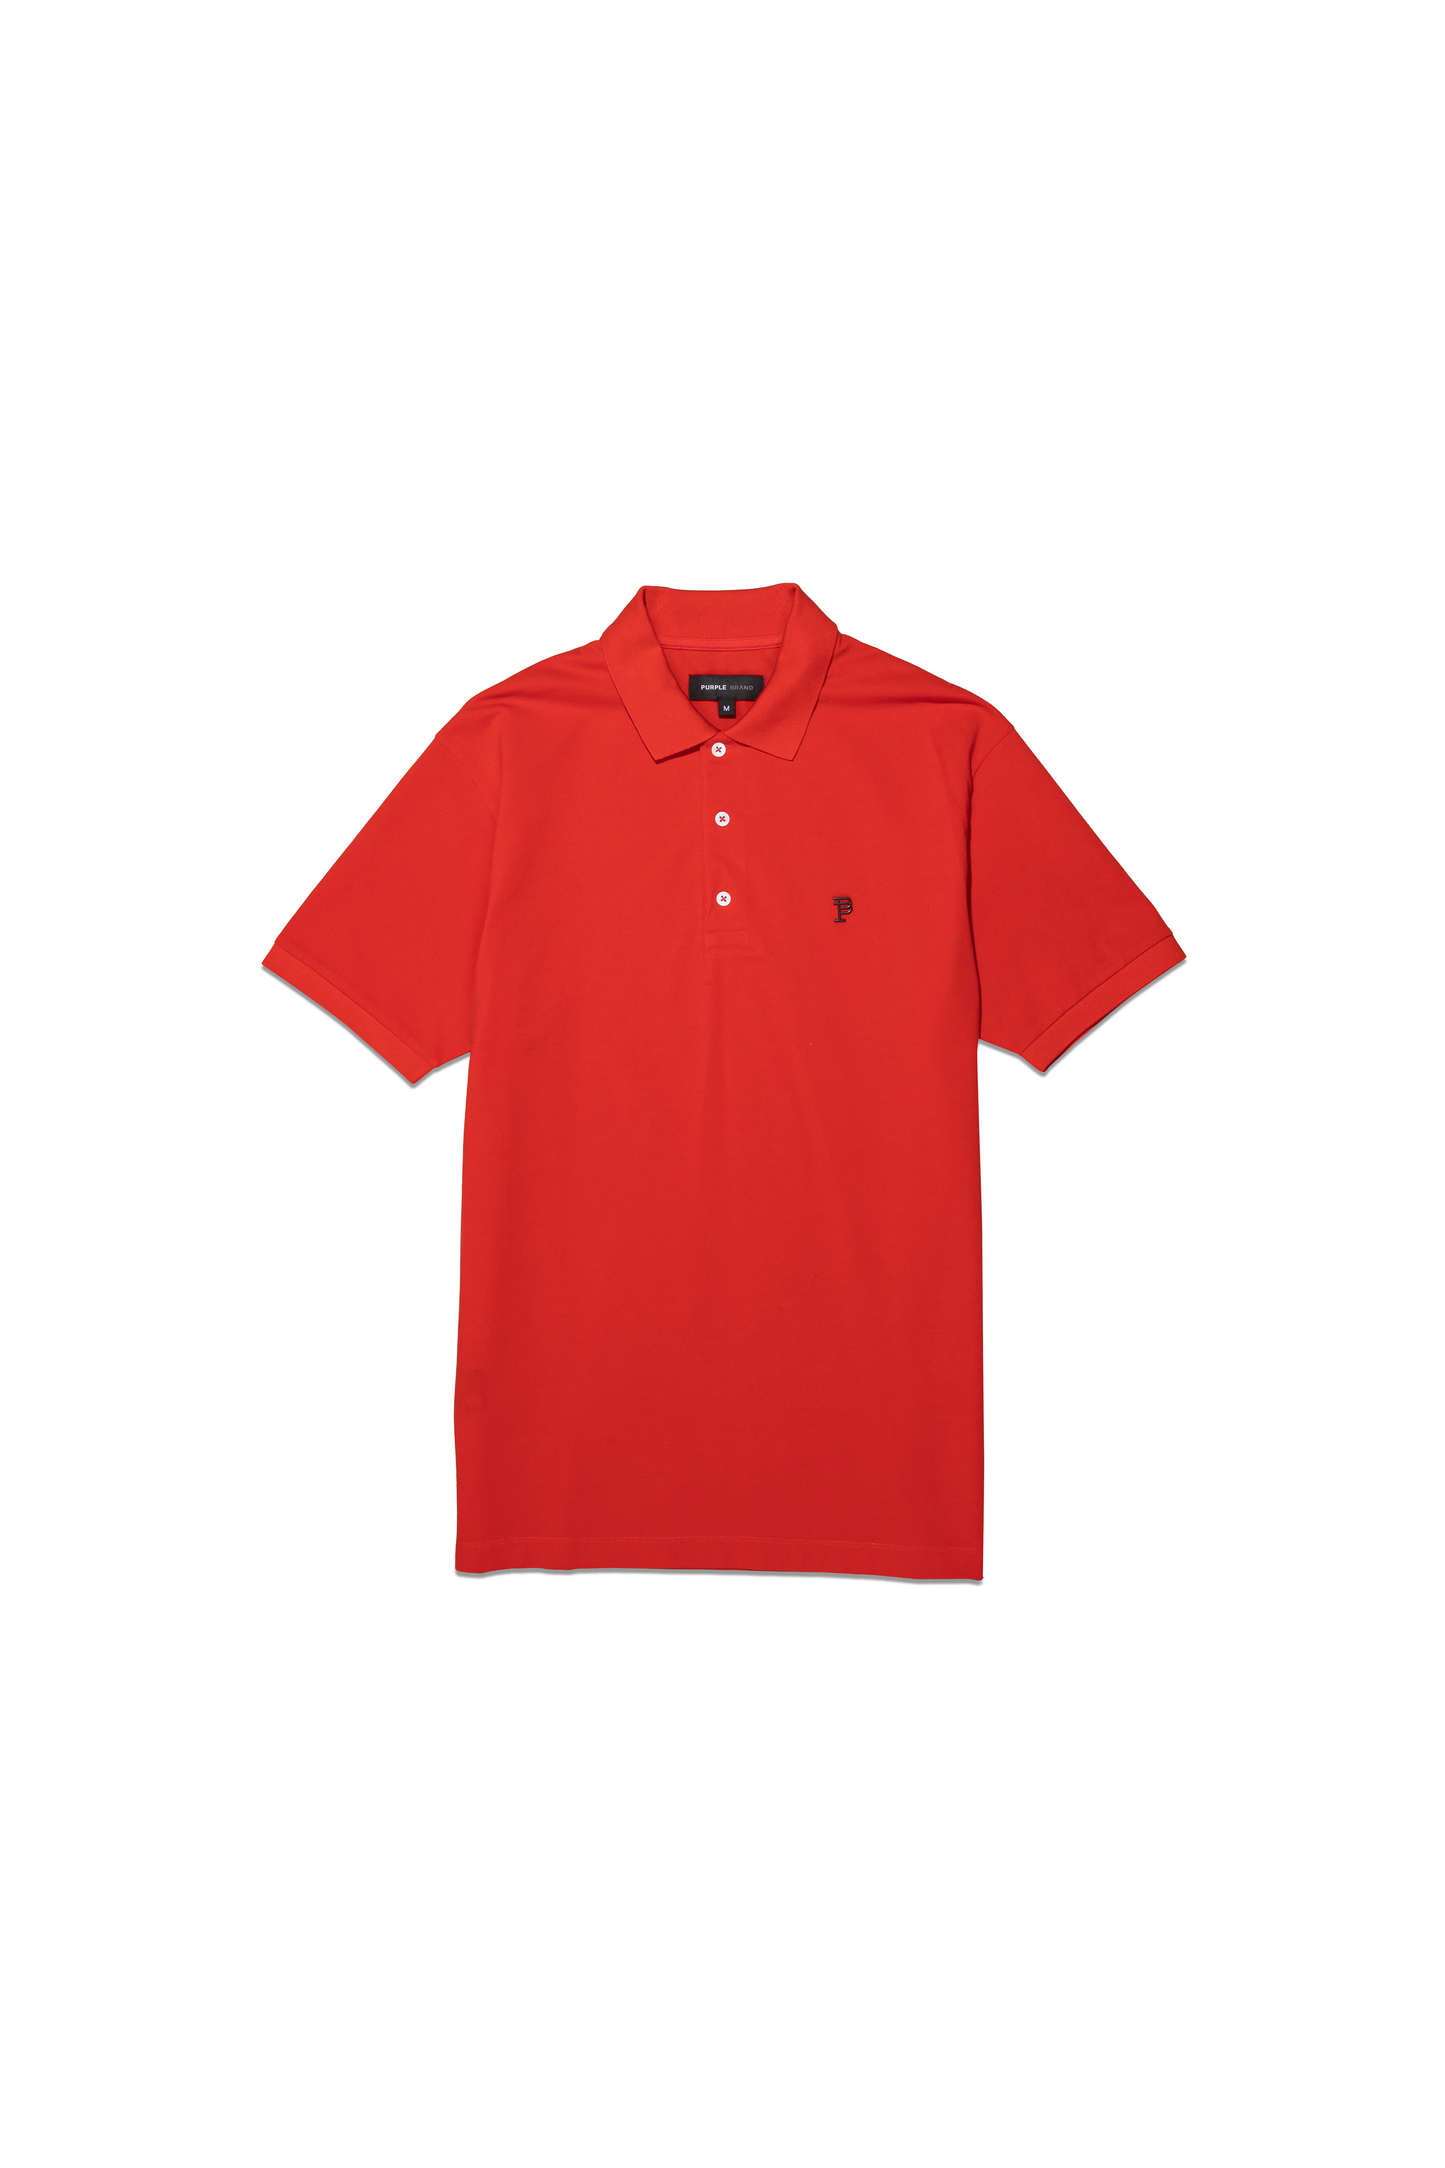 PIQUE KNIT POLO - Red